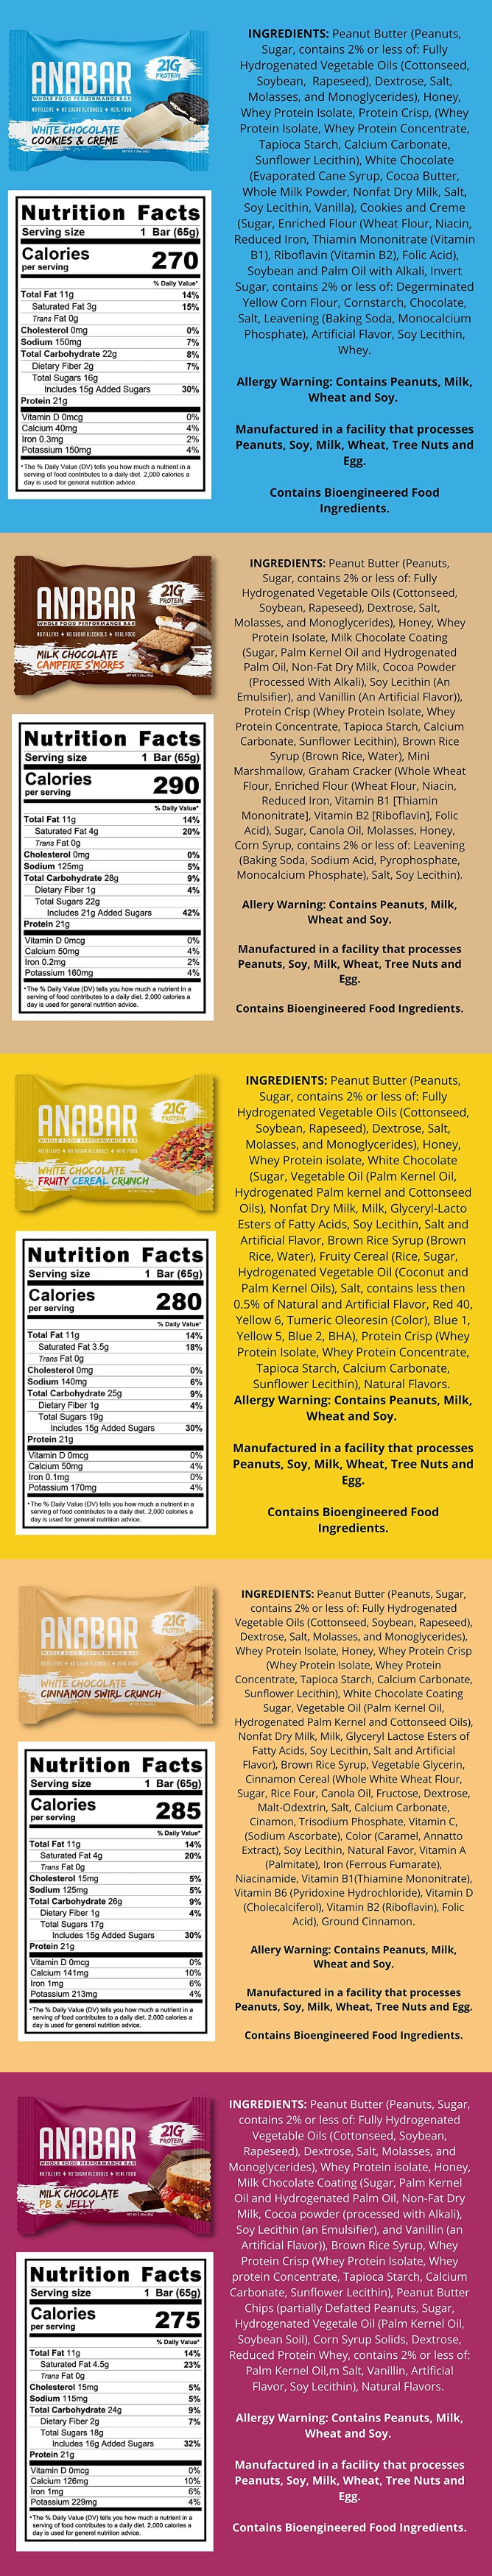 ANABAR nutrition bars featuring flavors like White Chocolate Cookies & Creme and Milk Chocolate Campfire S'mores. Each bar contains 21g of protein with 11g total fat.